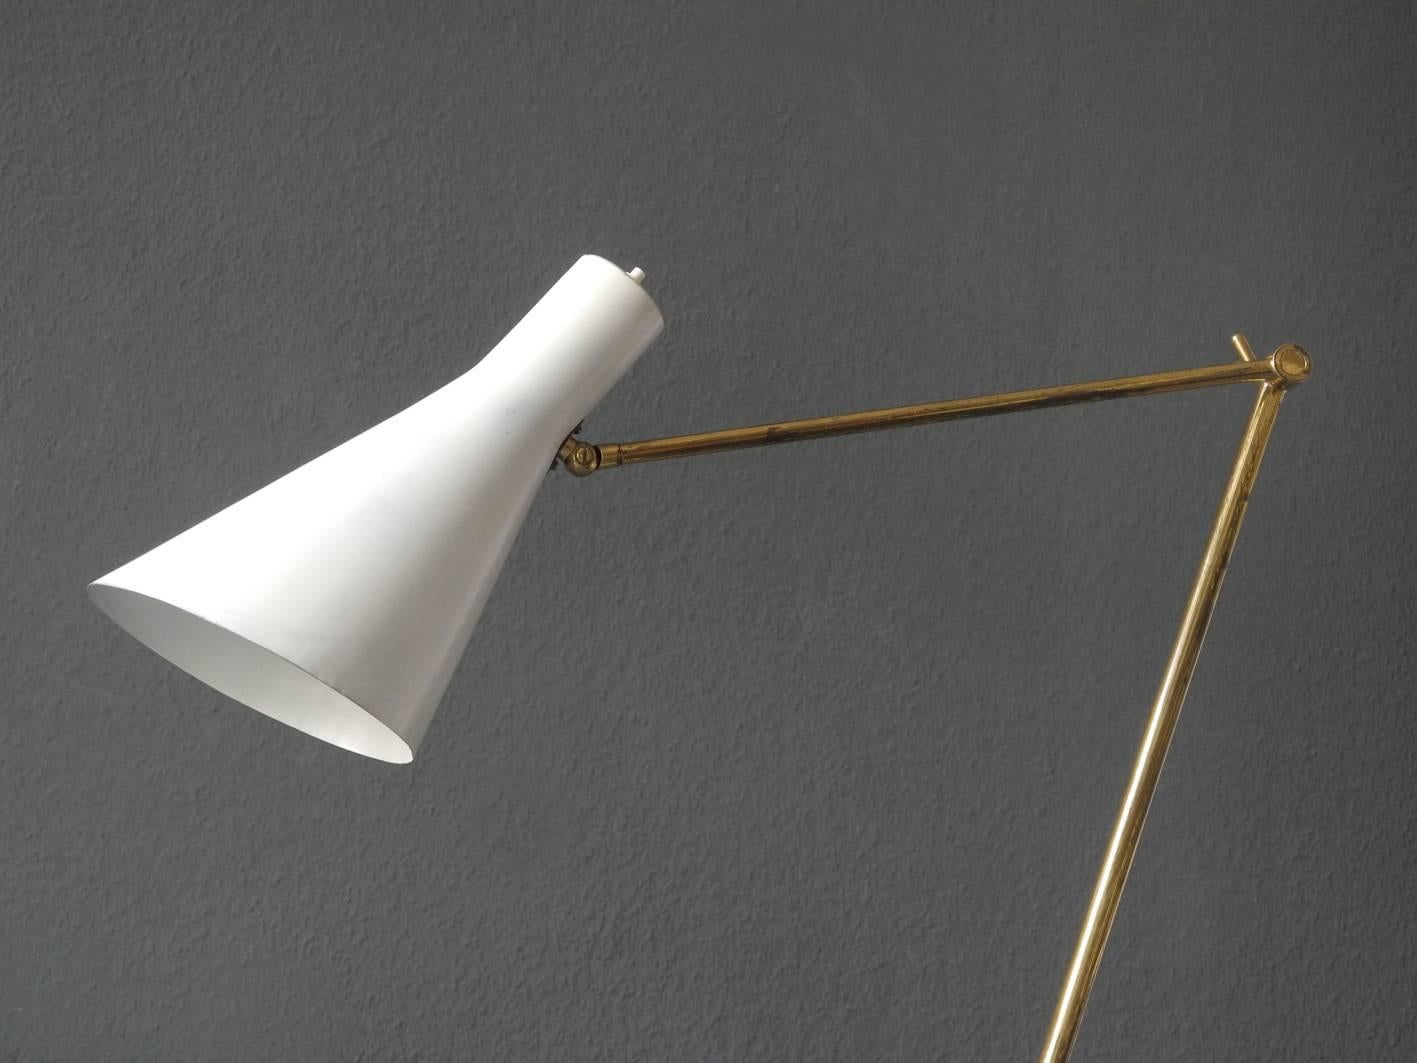 Mid-Century Modern Italian modern brass joint clamp lamp with cone shade.
Made in Italy. Beautiful minimalistic design. Very high quality.
Steplessly adjustable due to two joints. Holds in every position.
Great patina on brass, slight bumps on